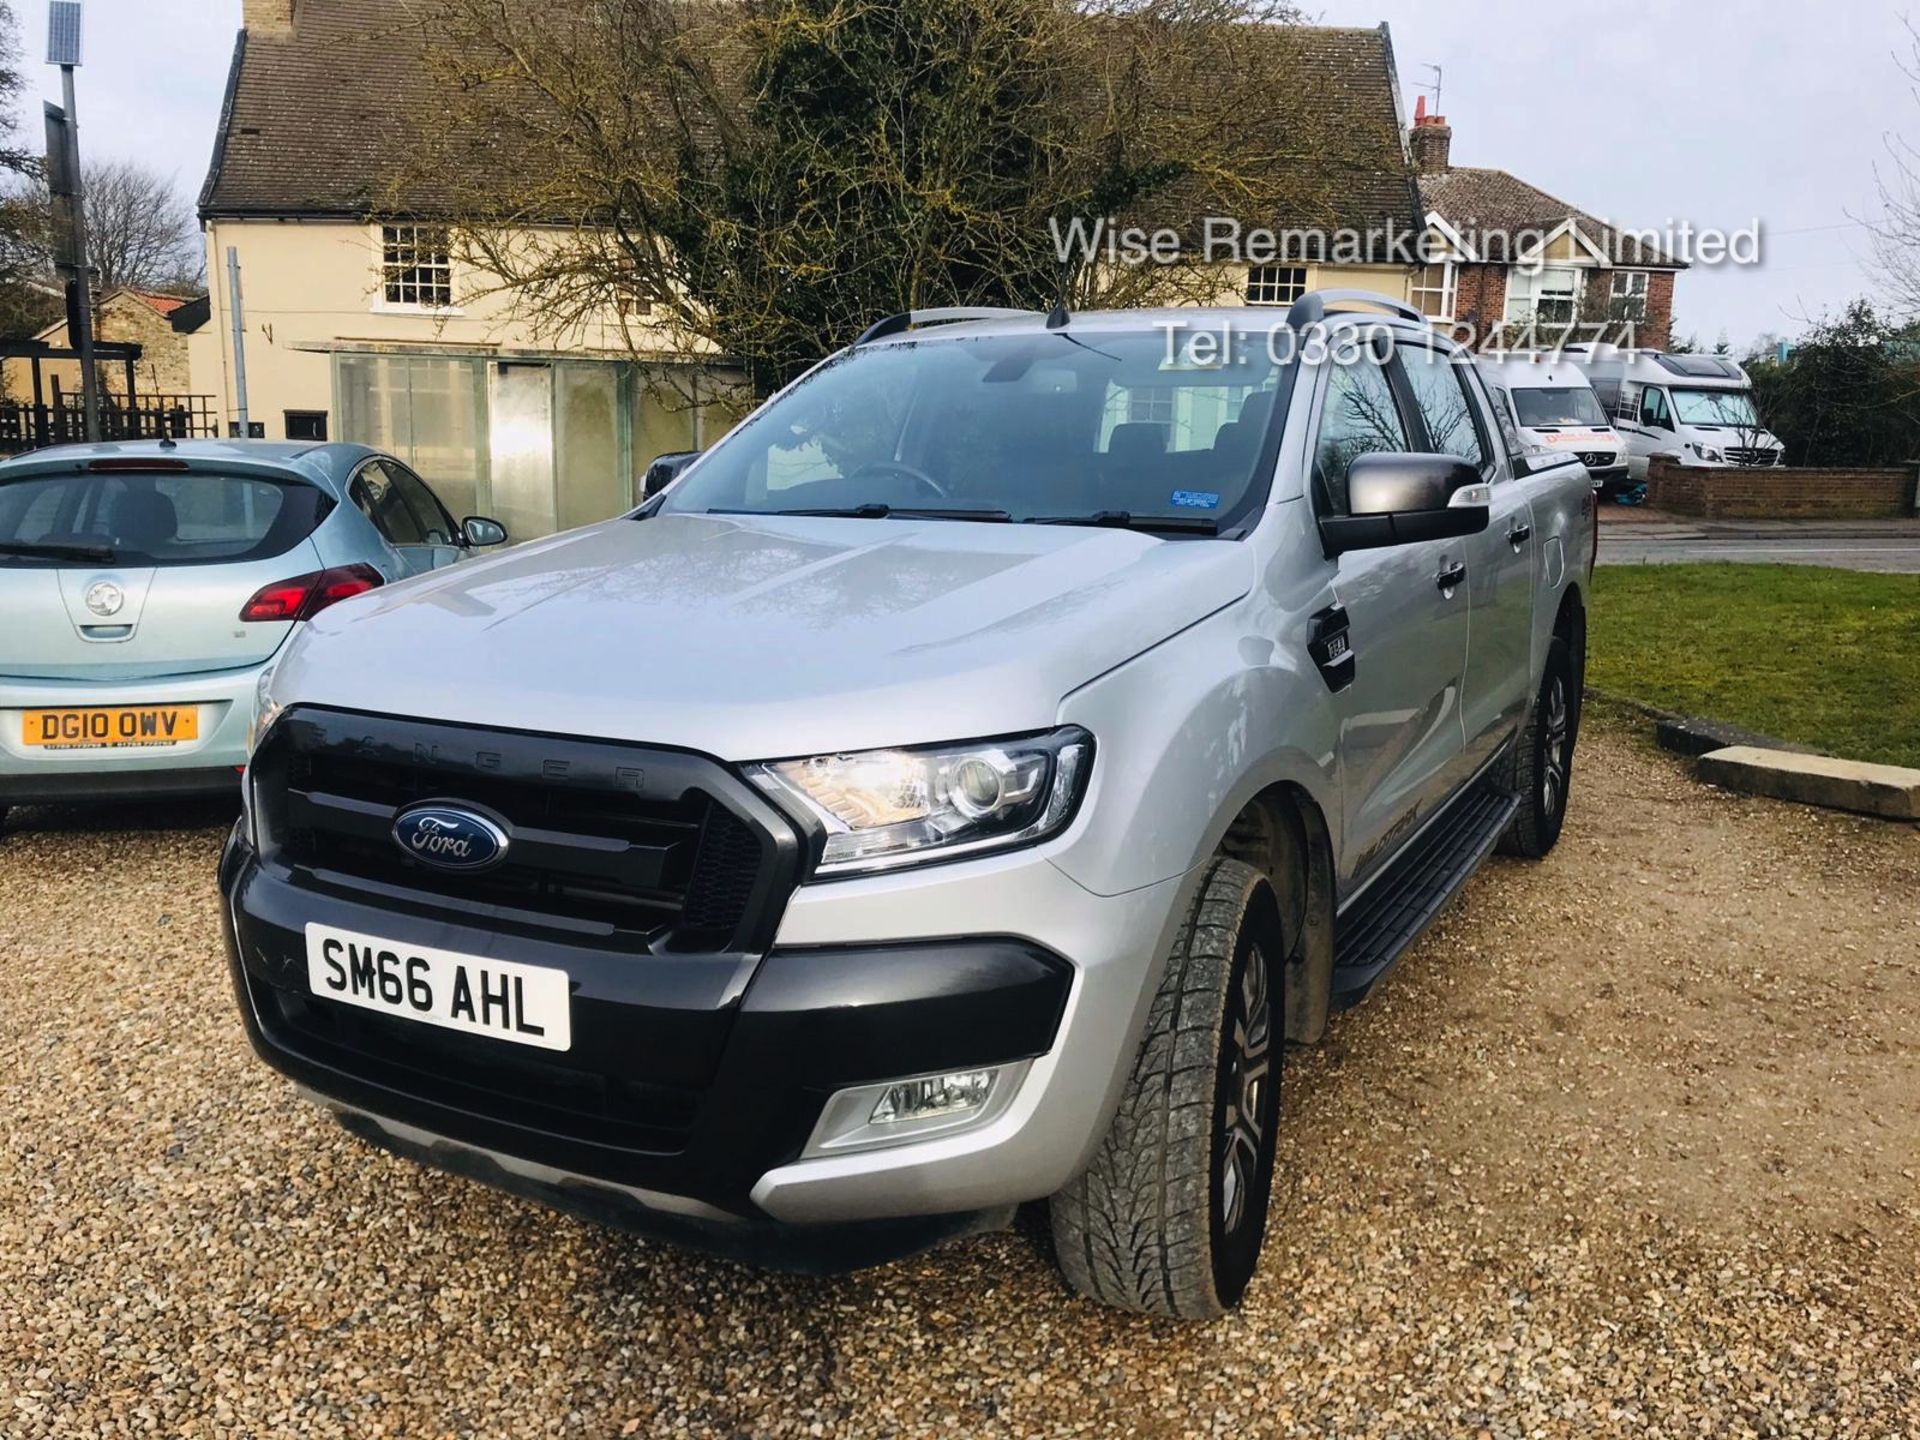 Ford Ranger 3.2 TDCI WILDTRAK - Auto - 2017 Model - 1 Former Keeper - 4x4 - TOP OF THE RANGE - Image 2 of 16